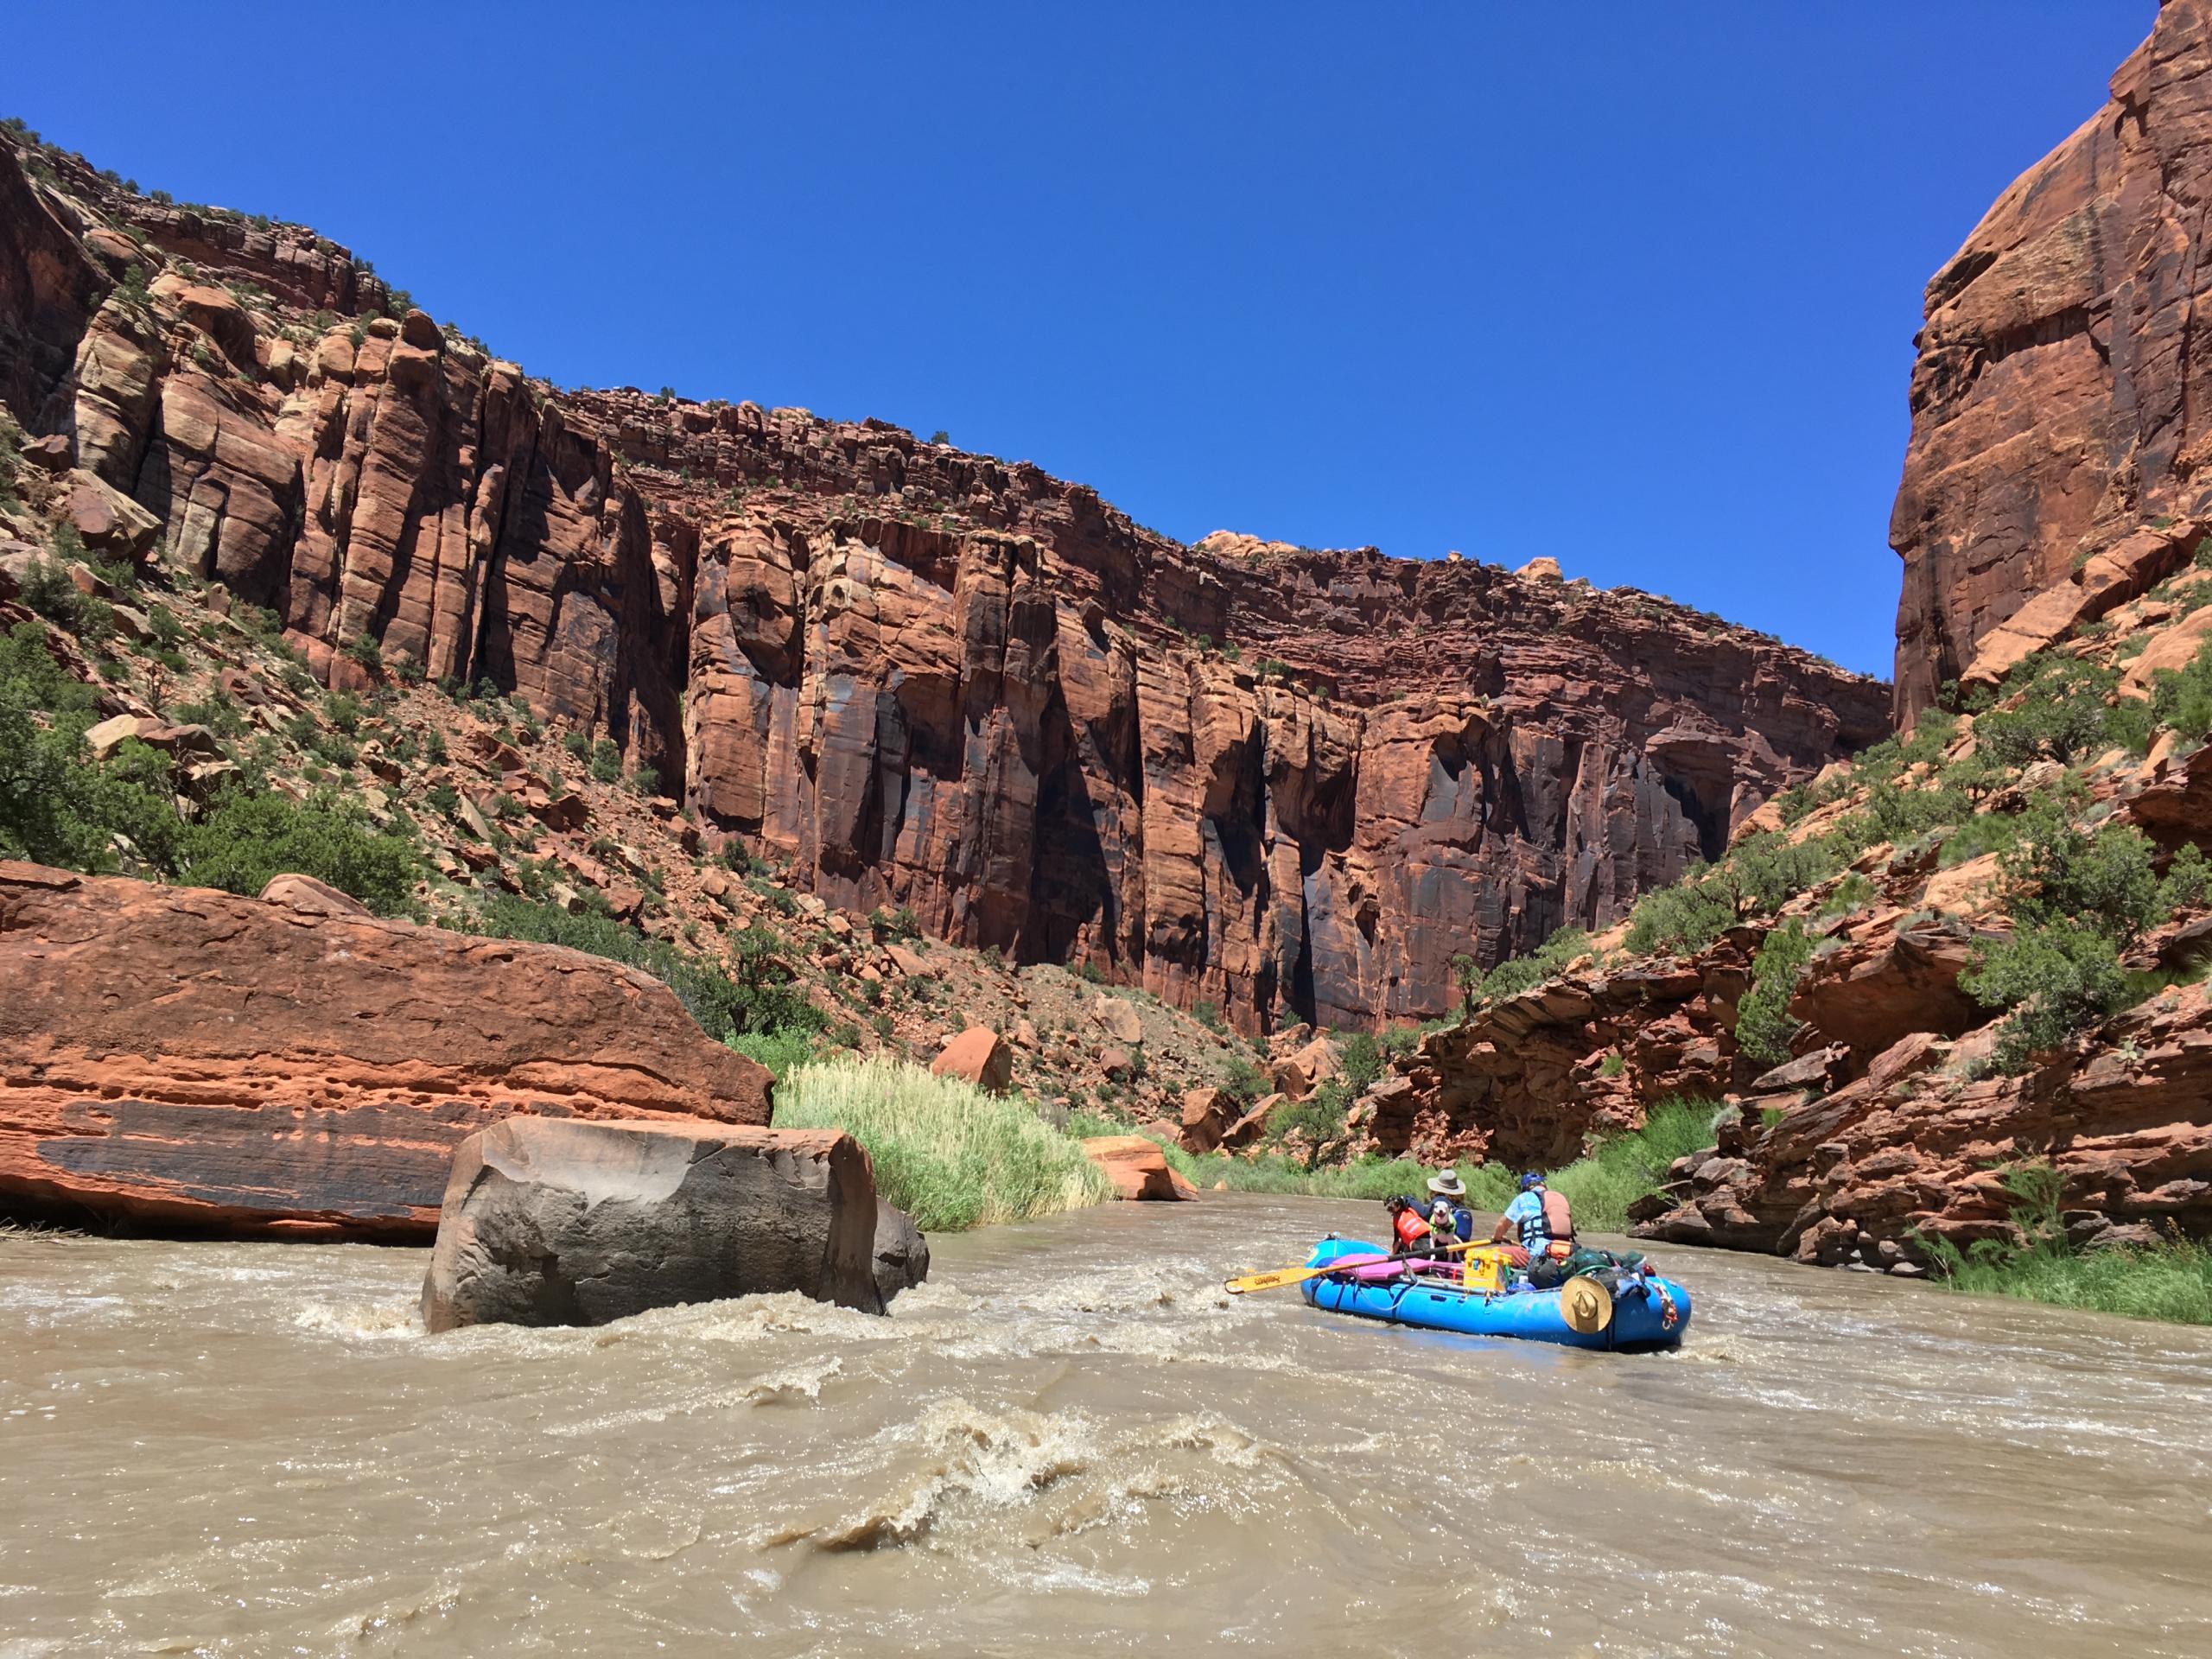 people floating on raft down the winding river surrounded by canyons